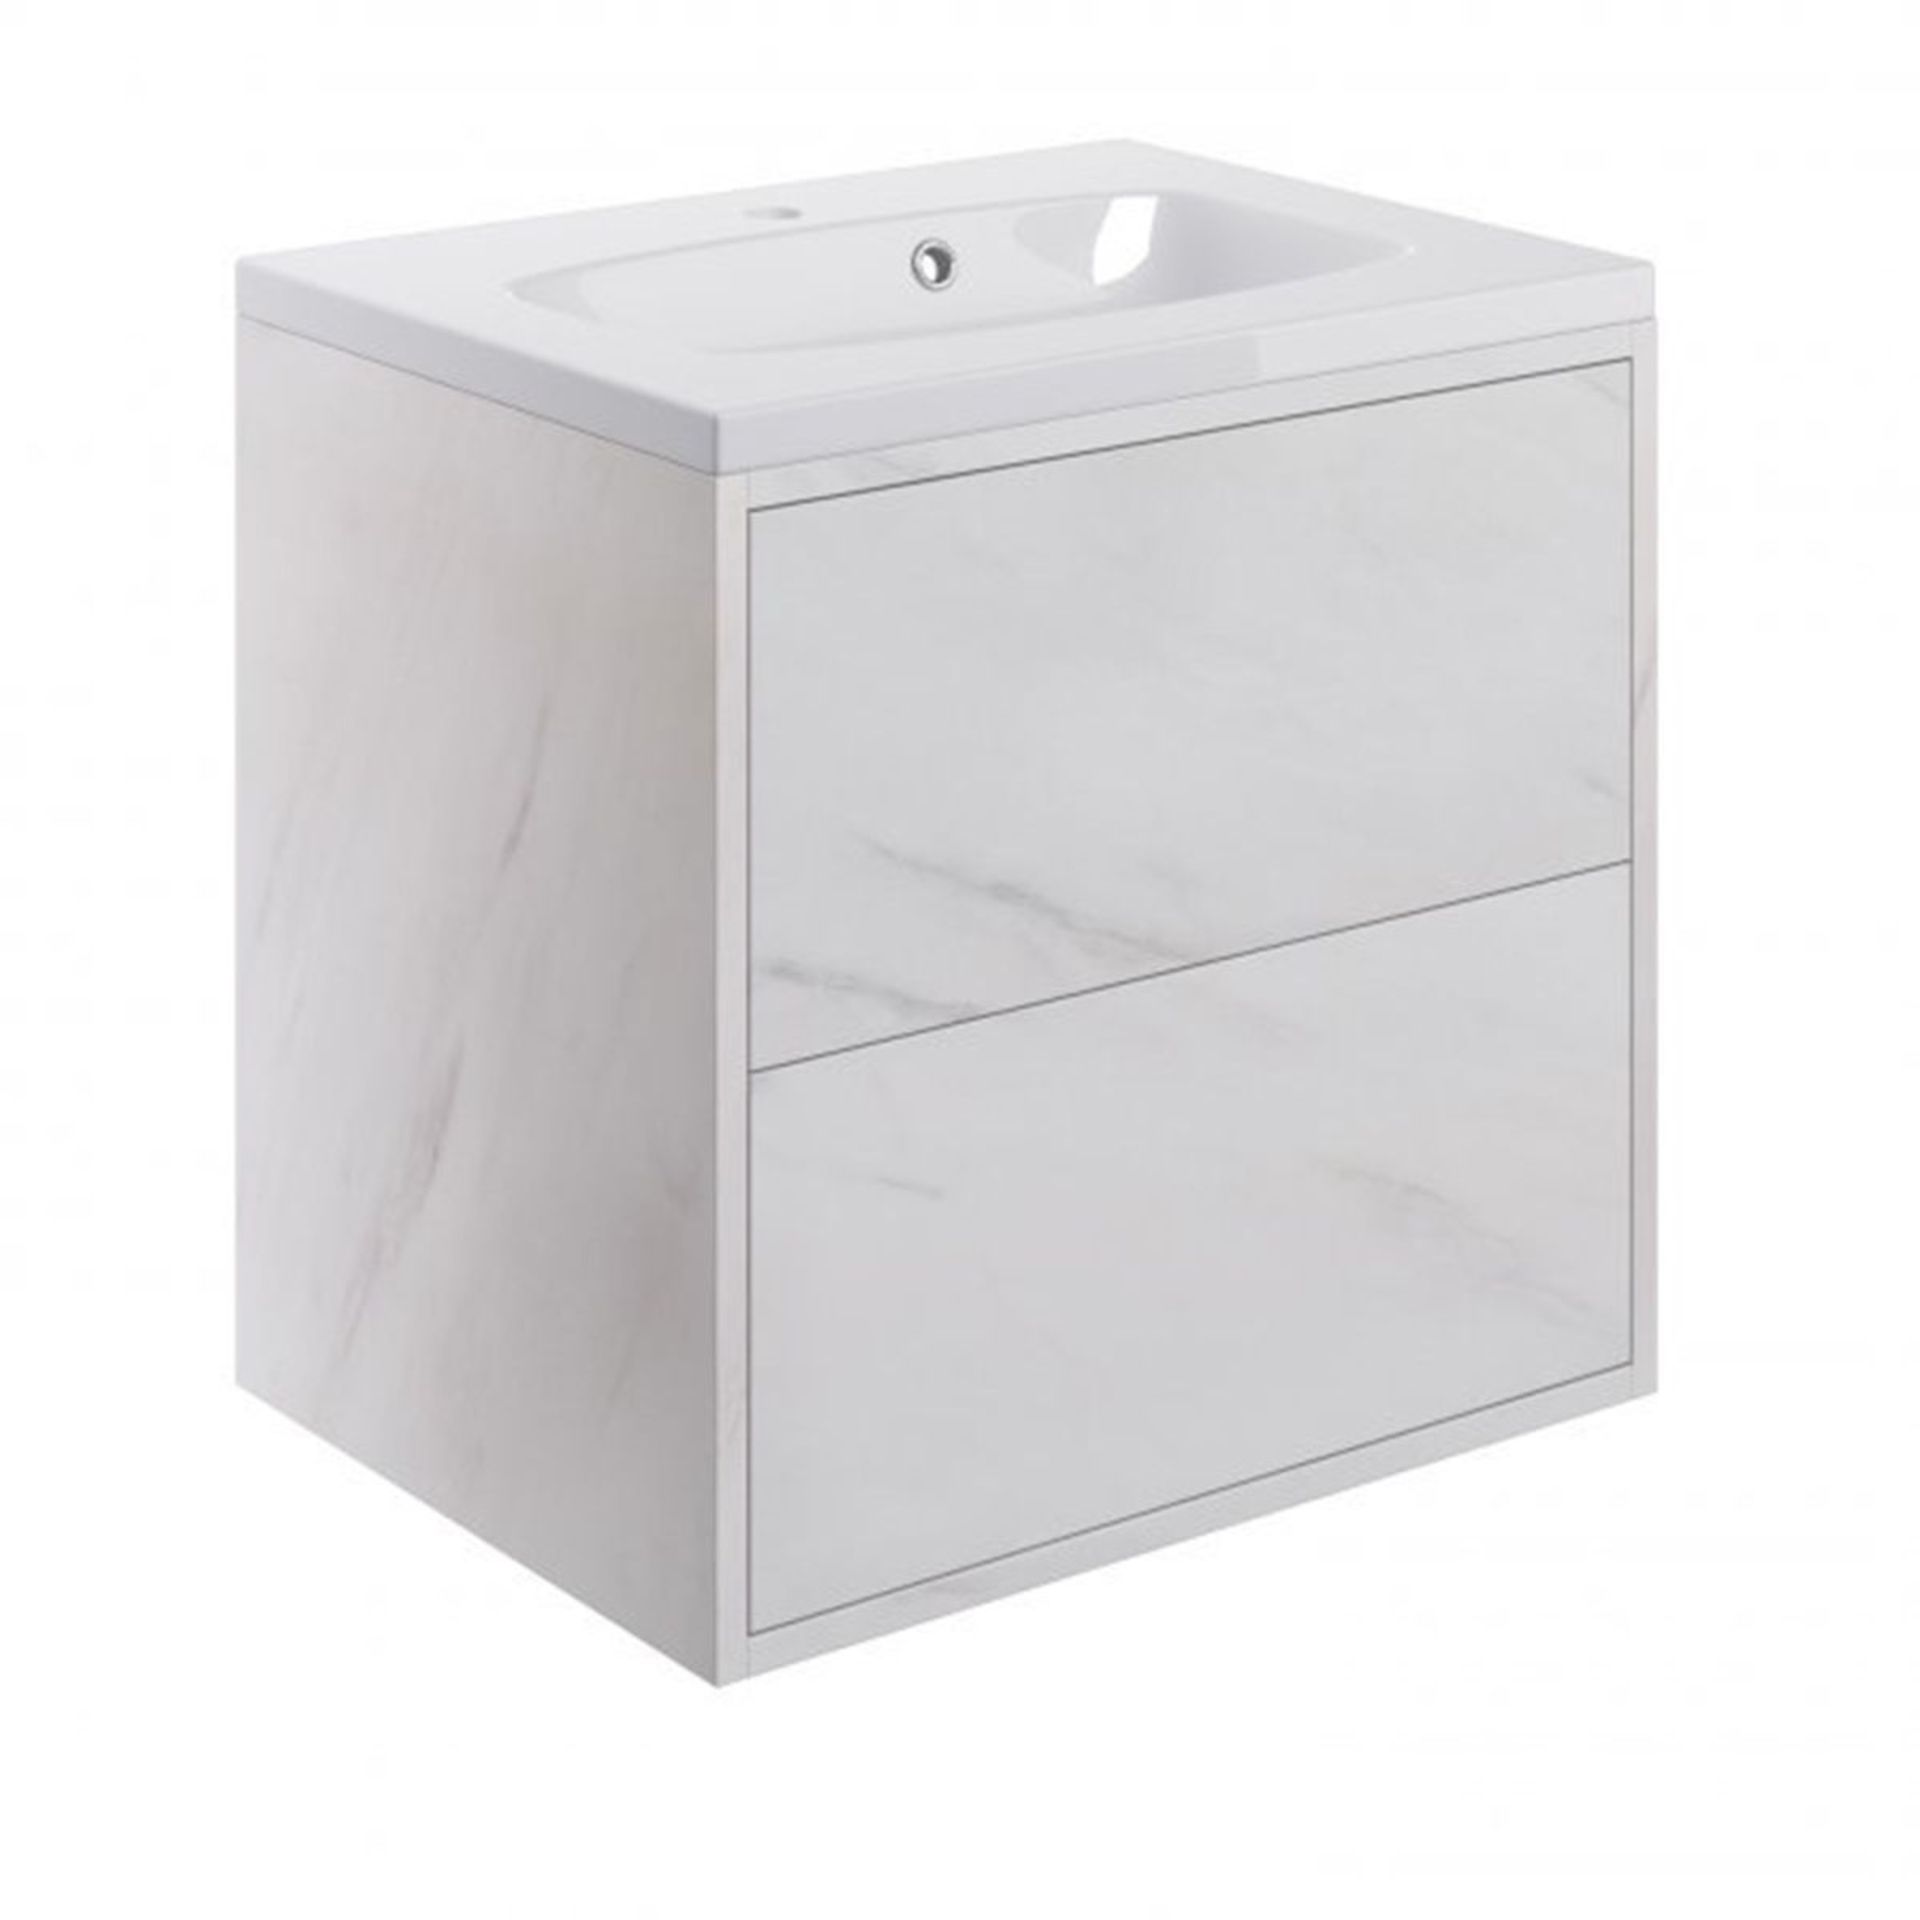 New (U239) Perla 600mm 2 Drawer Vanity Unit Marble. Rrp £435.99. Basin Not Included.